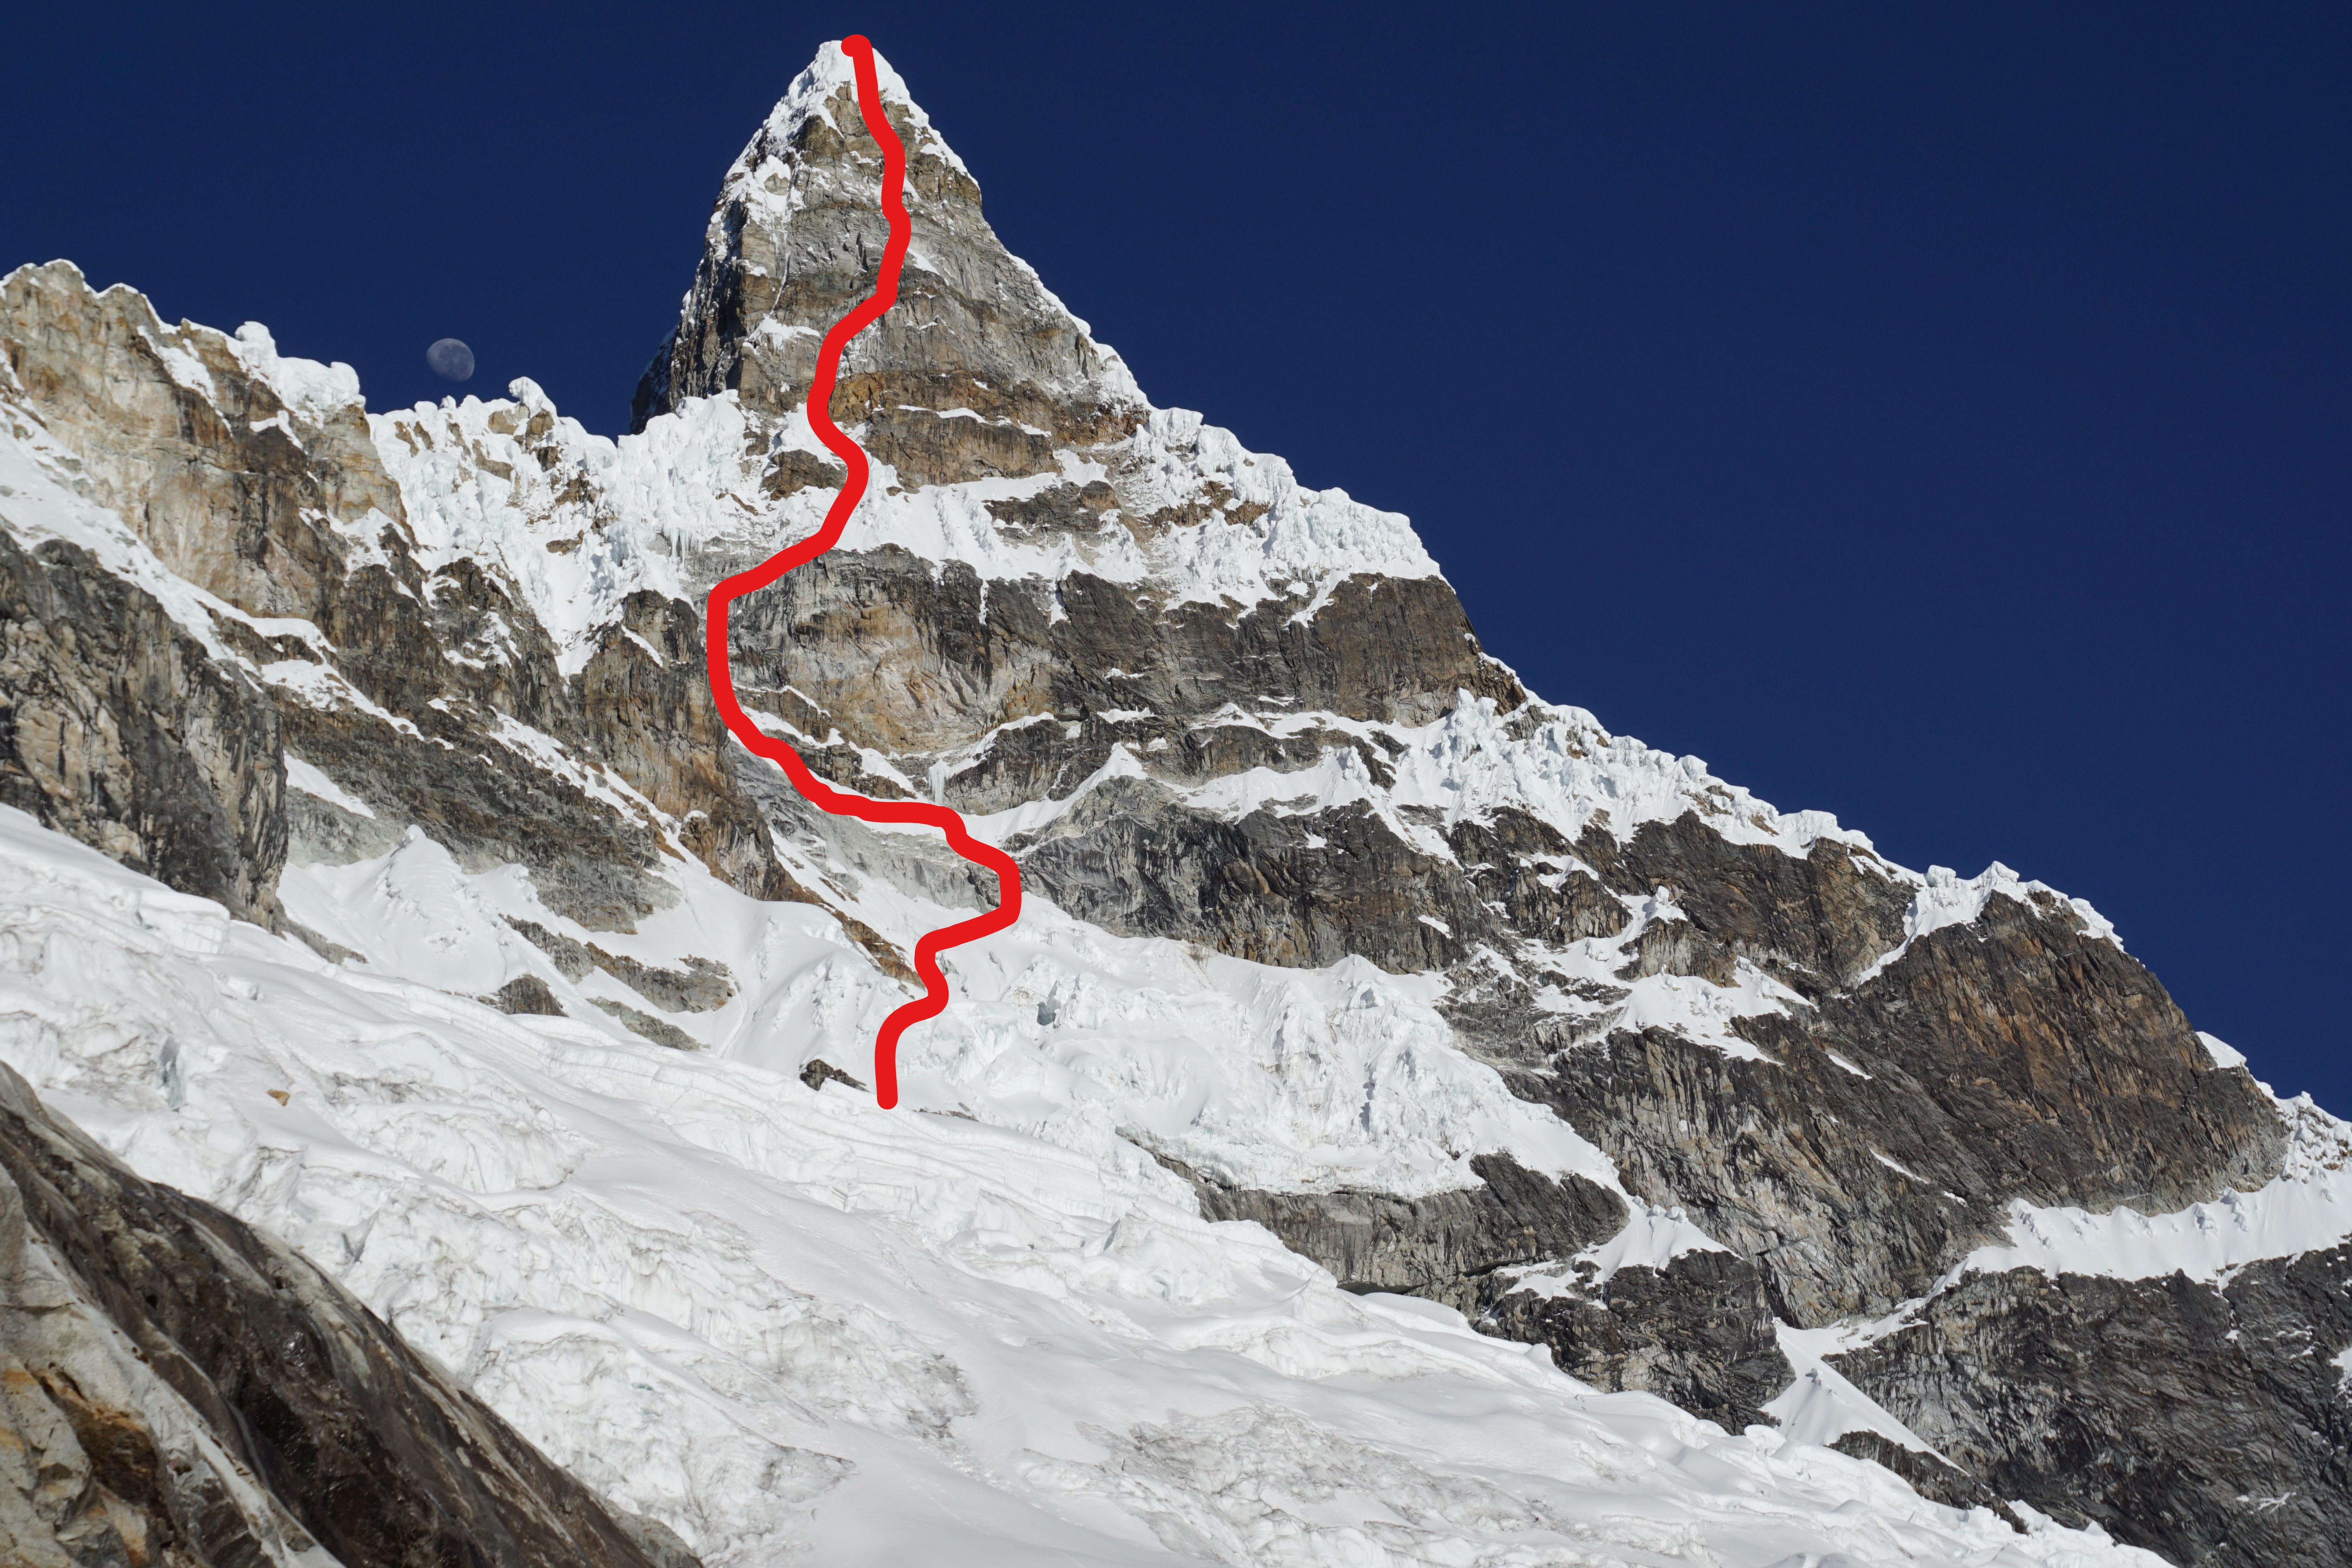 Chacraraju Este's east face with The Devil's Reach Around (M6 5.10, 90*) marked in red. [Photo] Quentin Lindfield Roberts